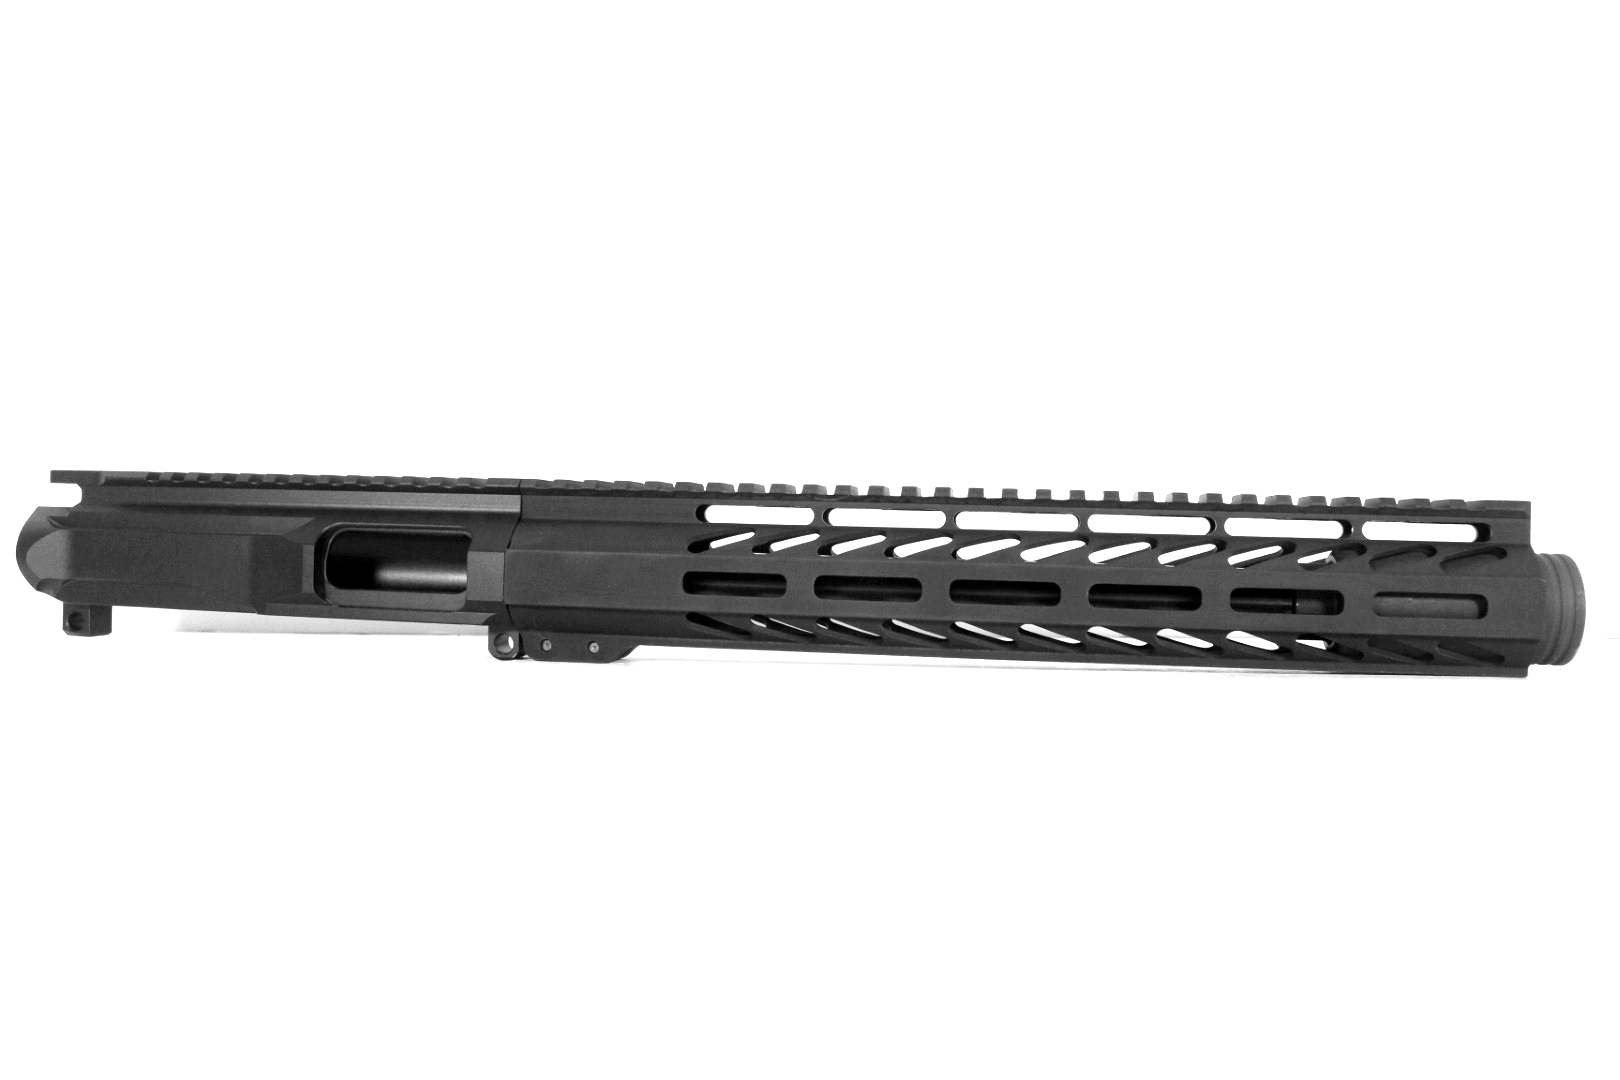 10.5 inch 10mm PCC Upper | Made in the USA